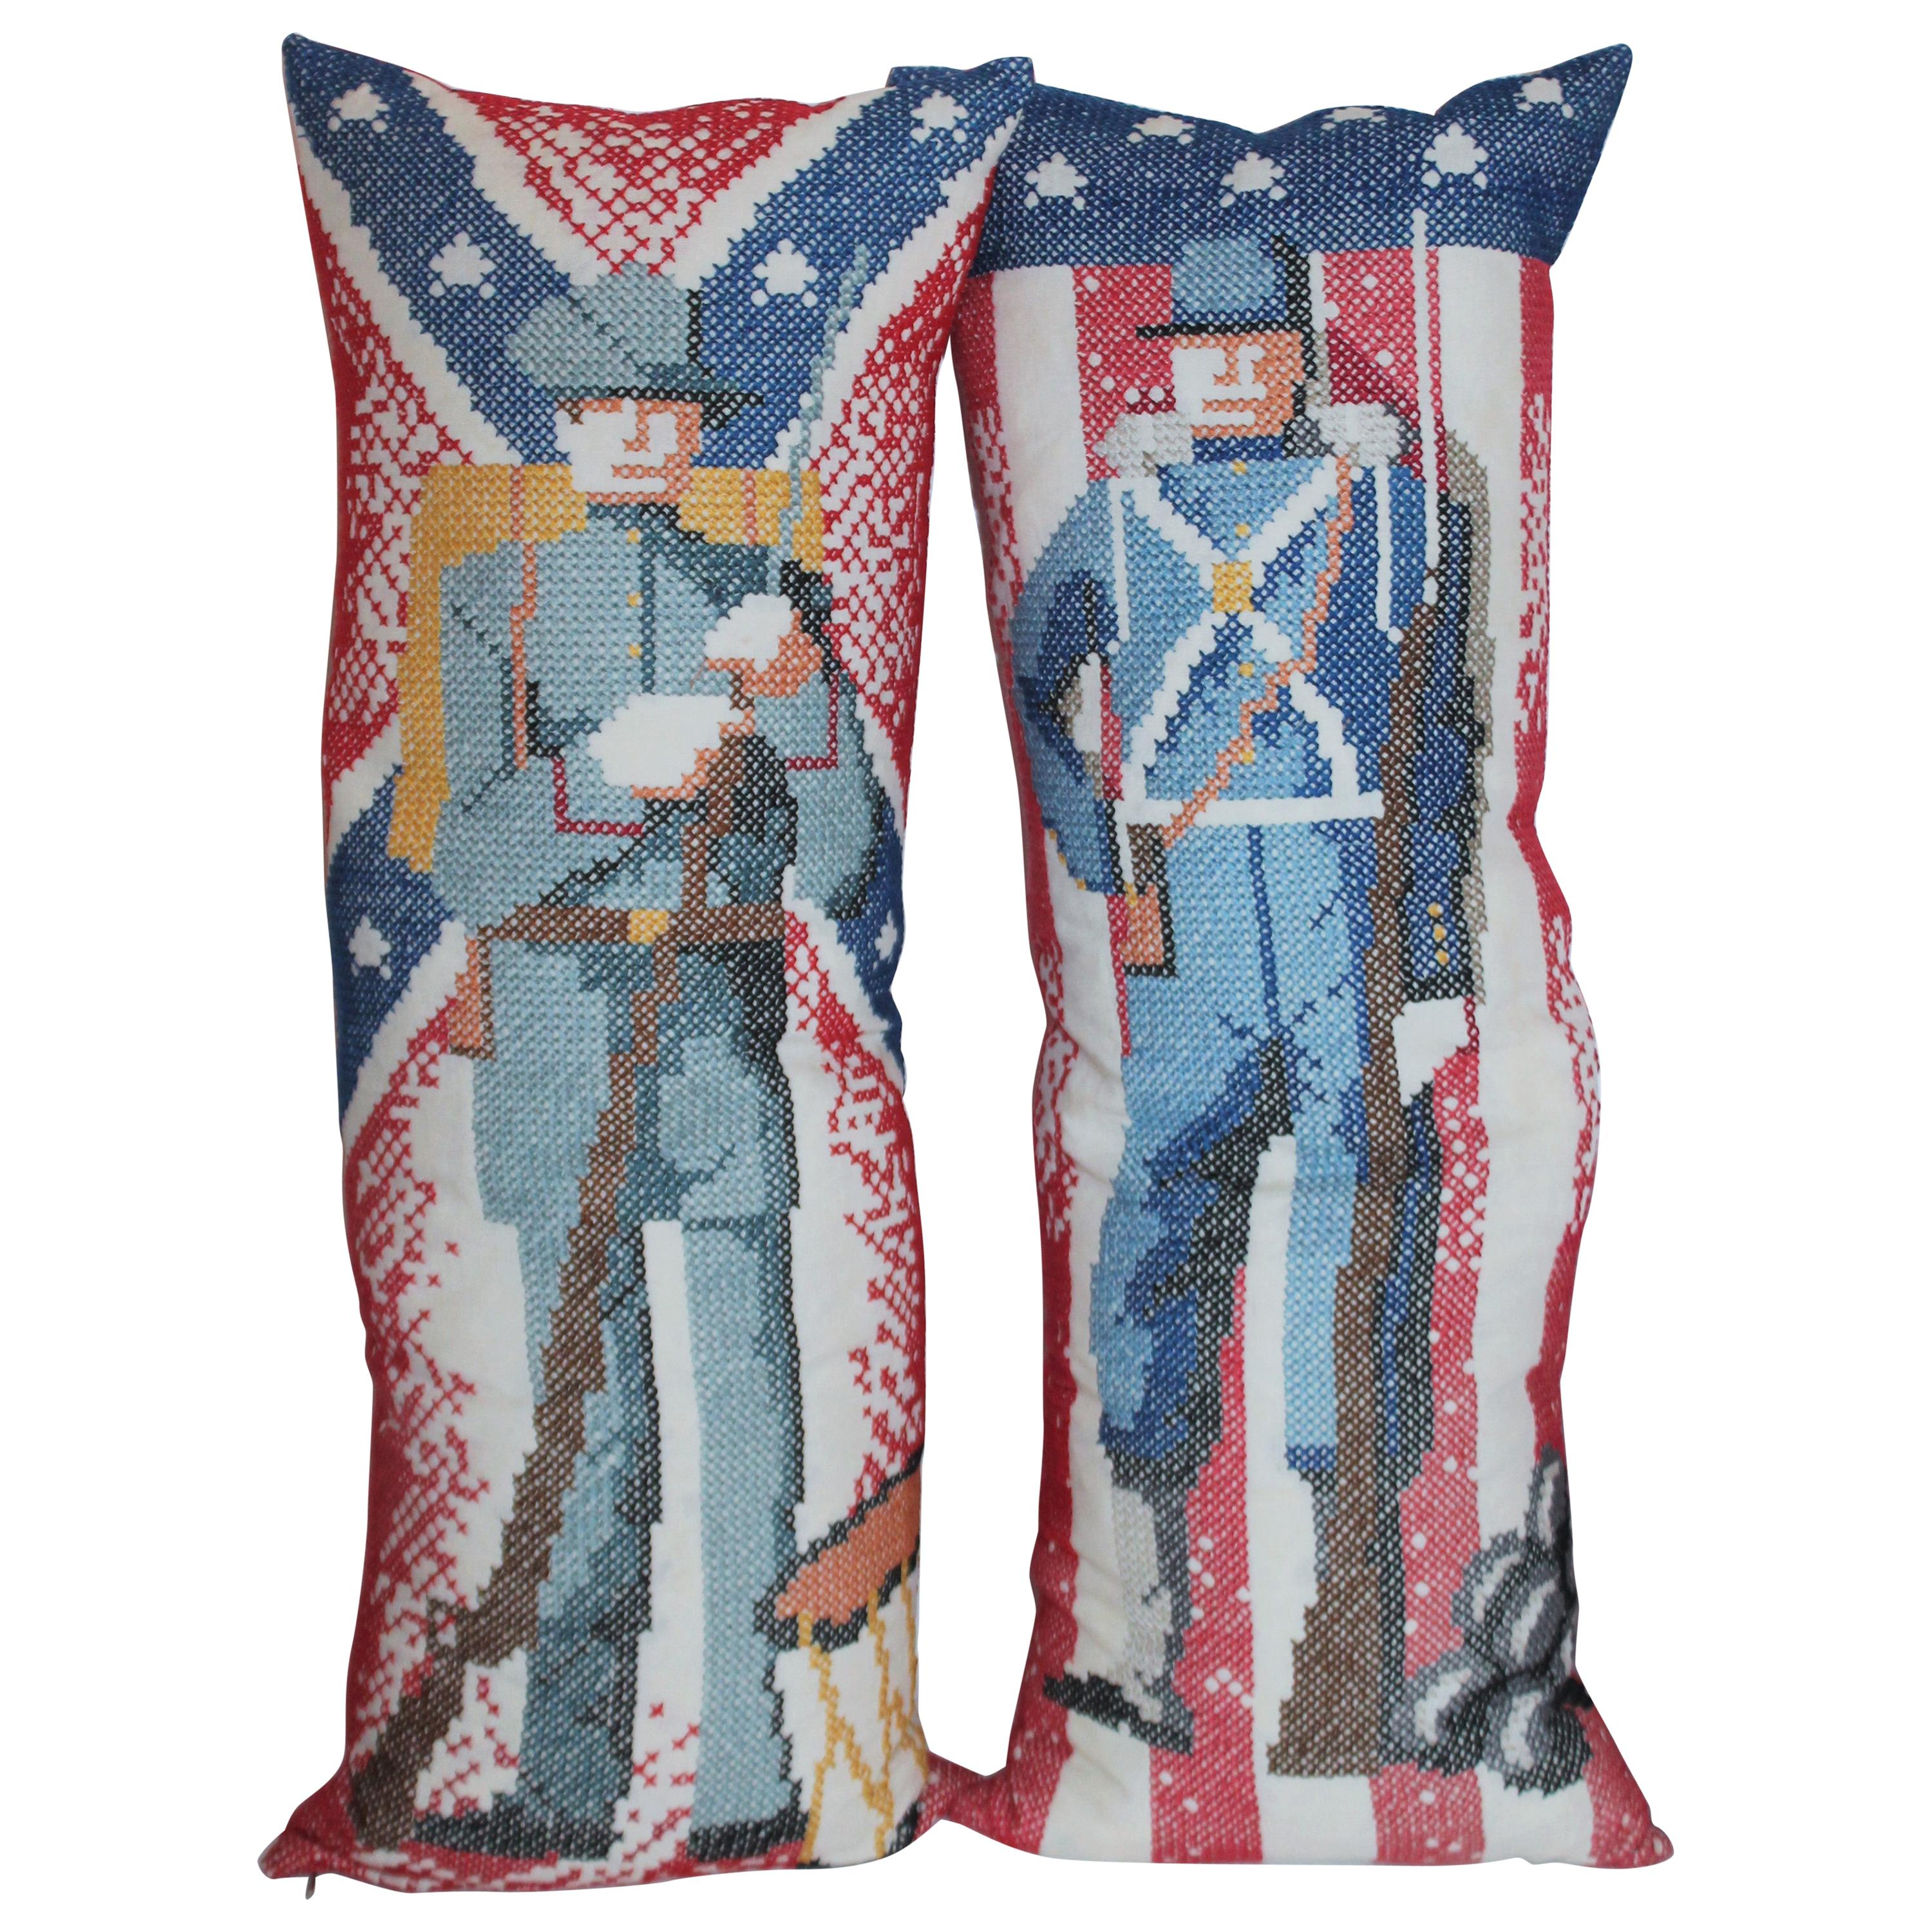 Handmade Pillows of Soldiers